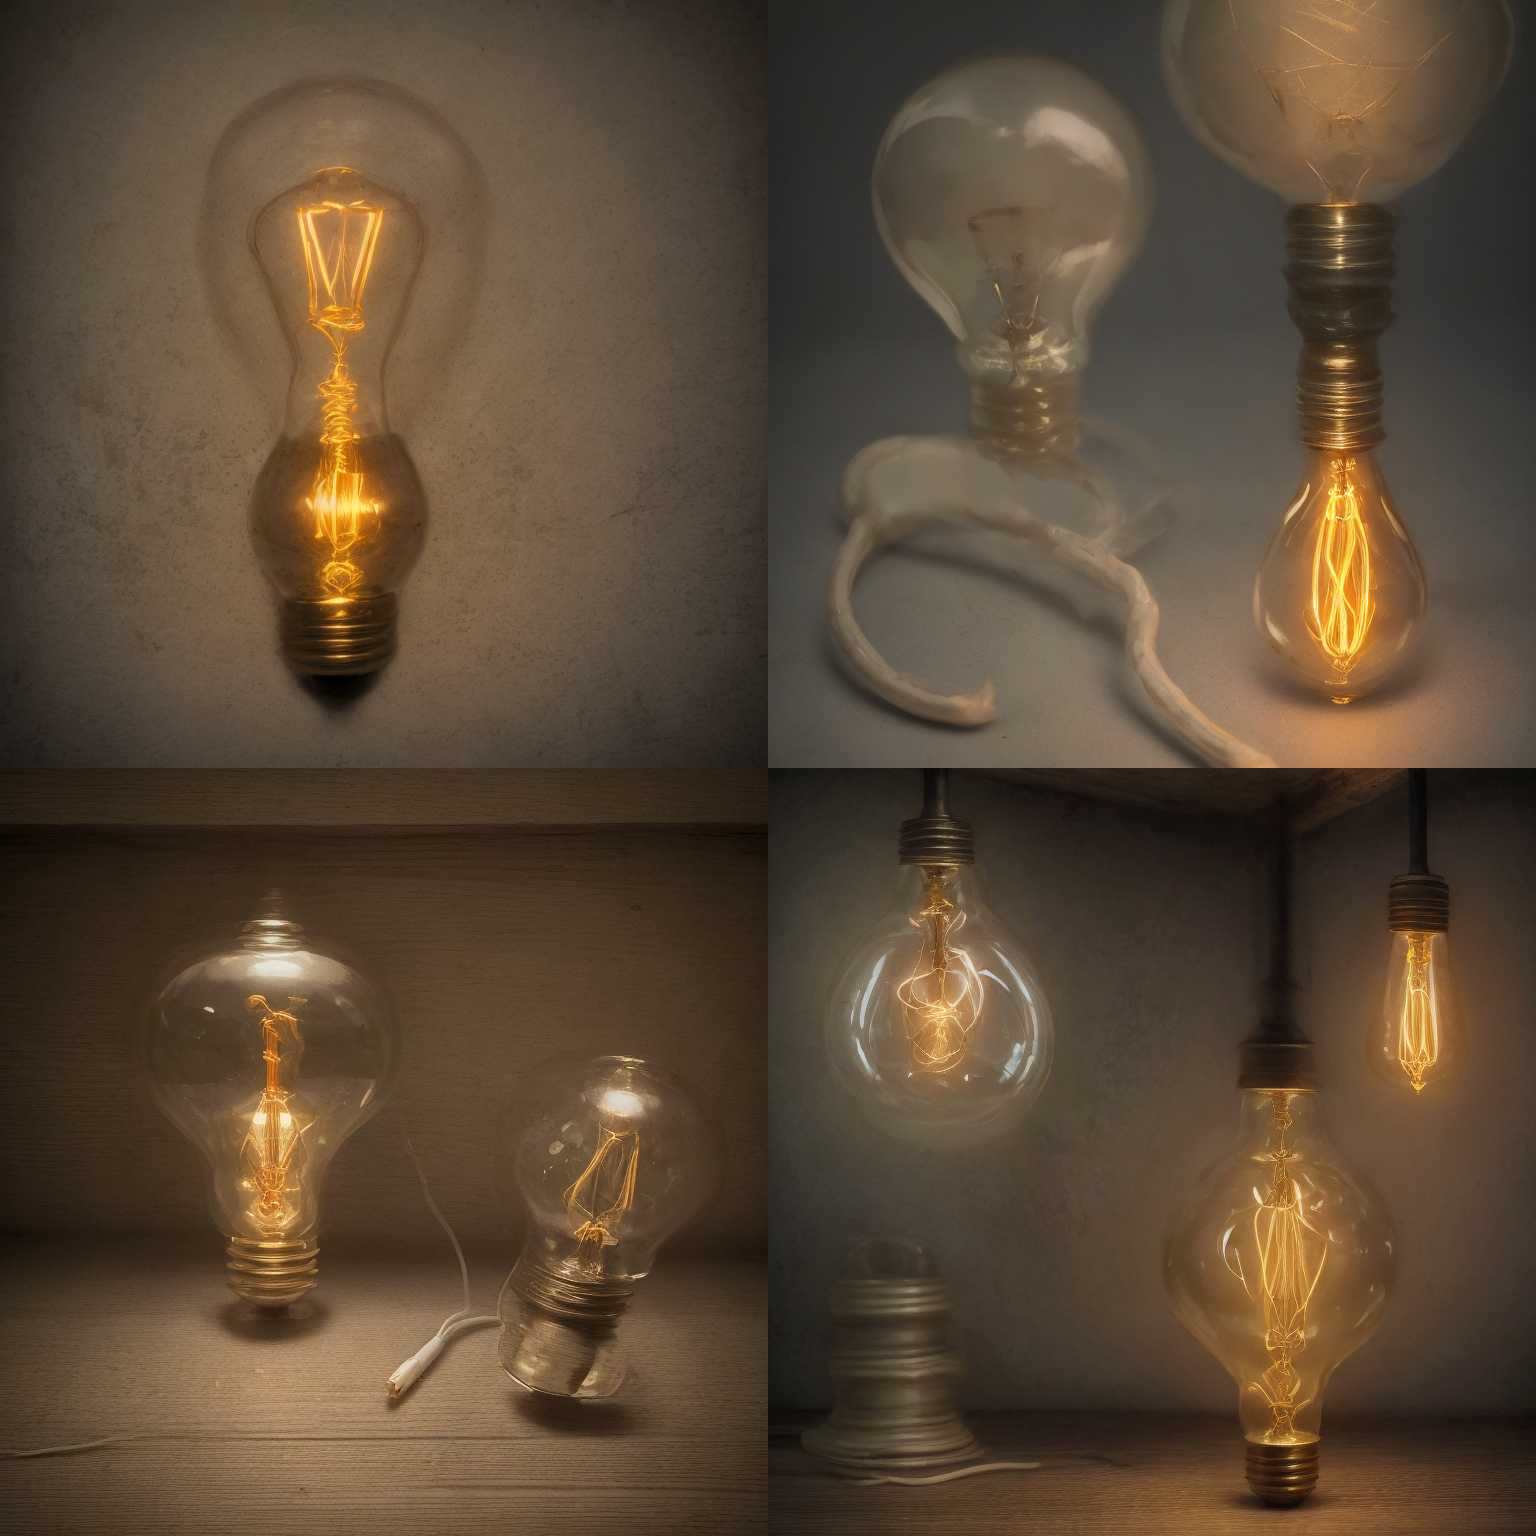 A lightbulb that's on but the filament's broken